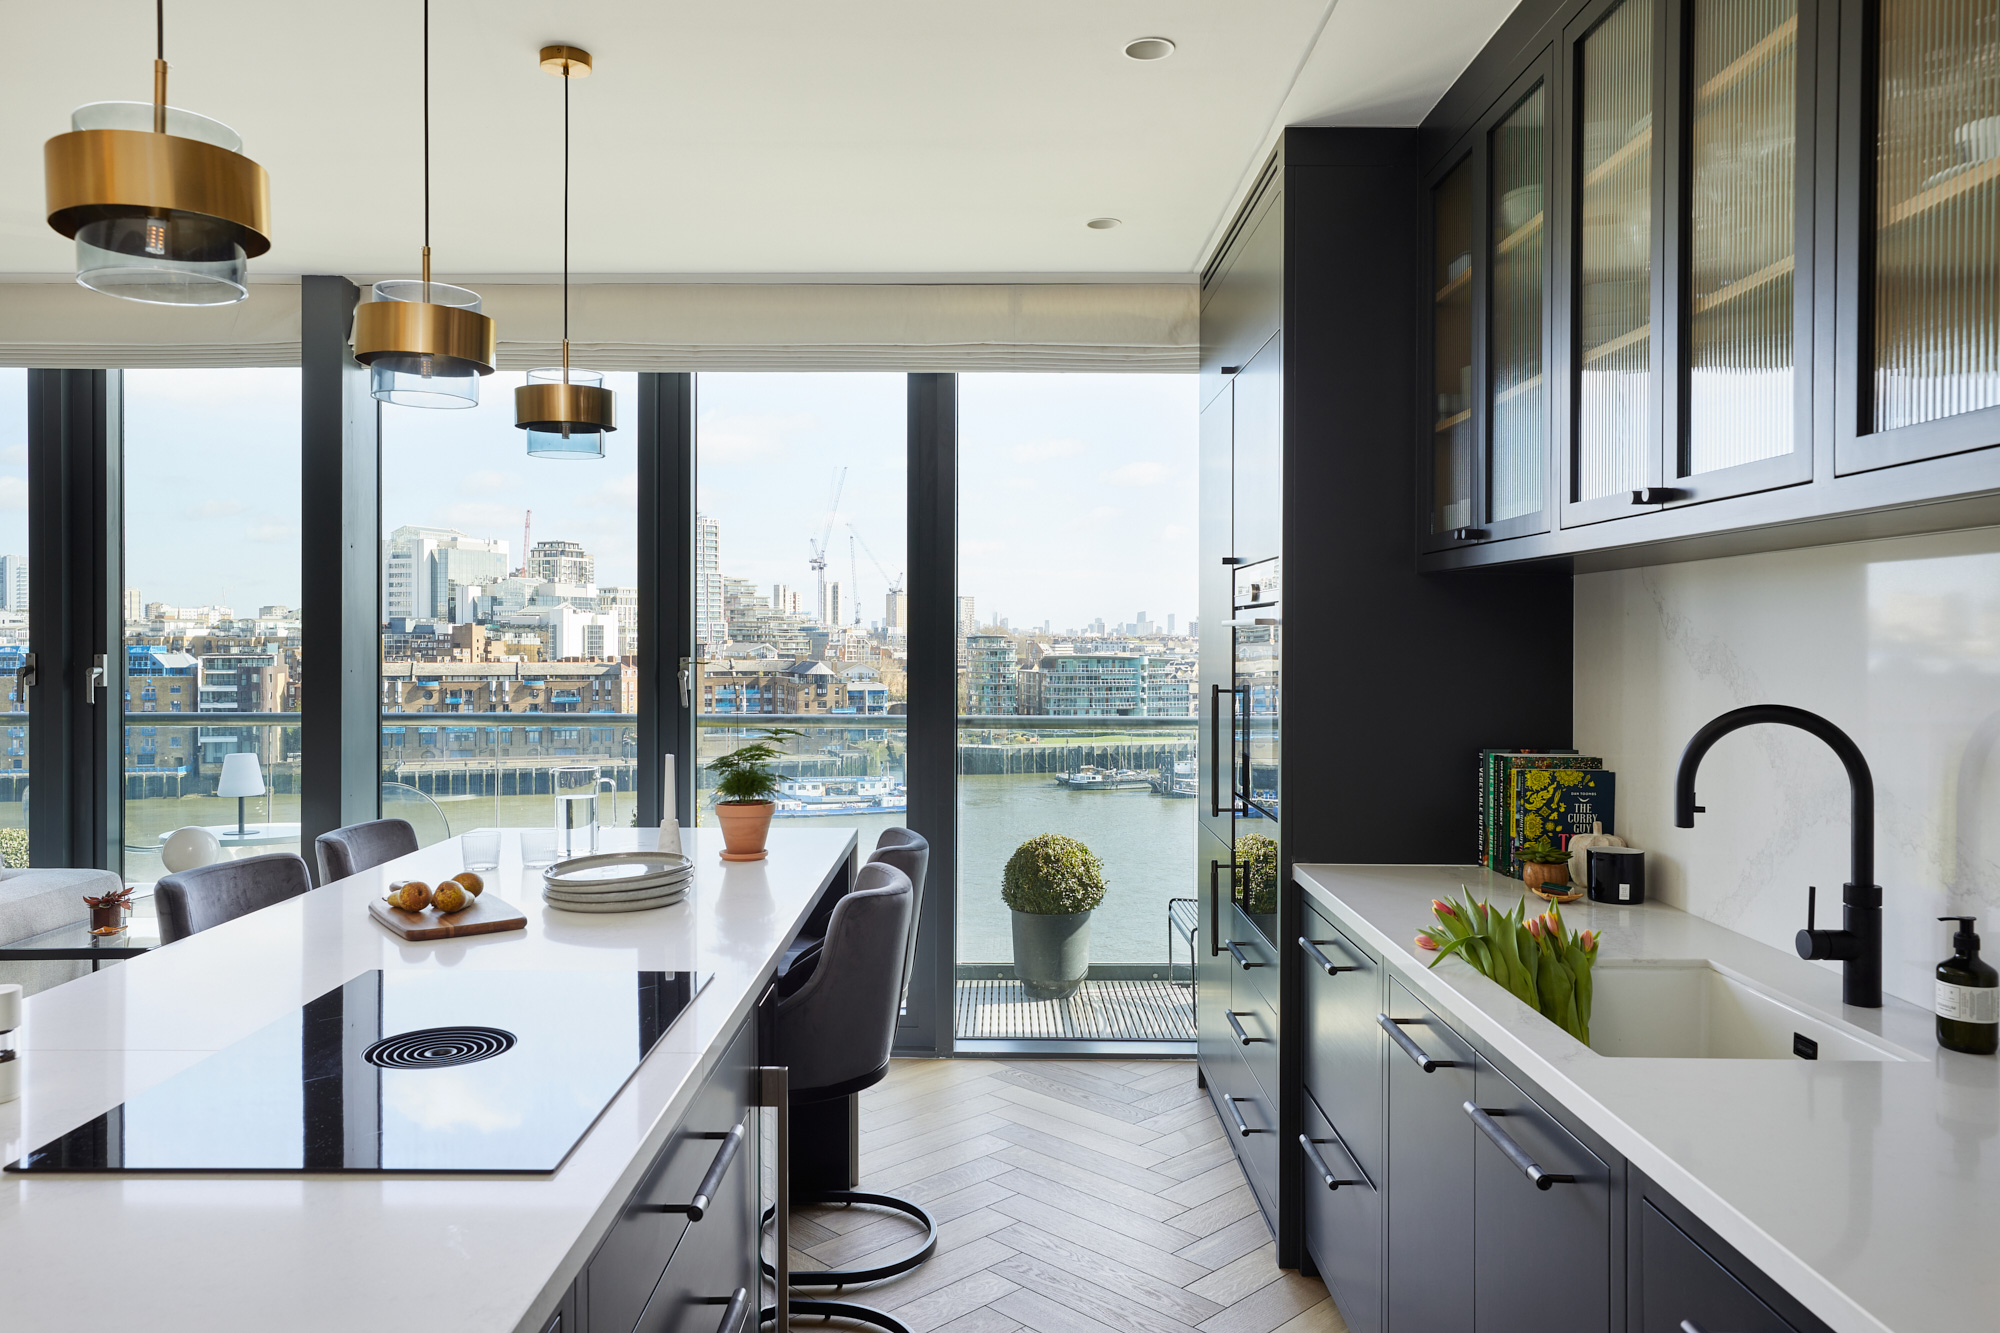 Bespoke kitchen overlooking the river Thames